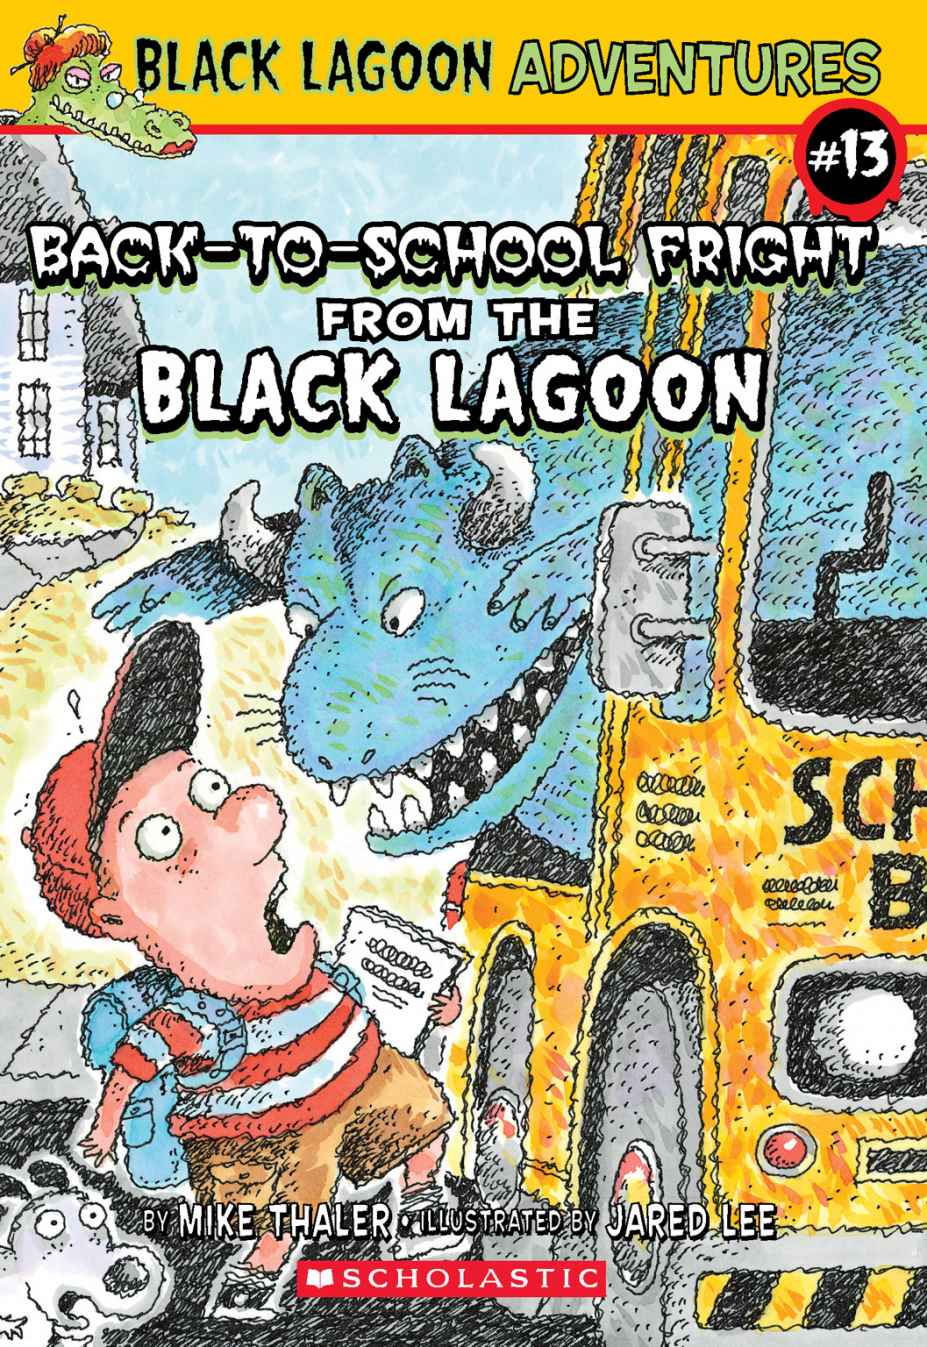 The Back-to-School Fright from the Black Lagoon